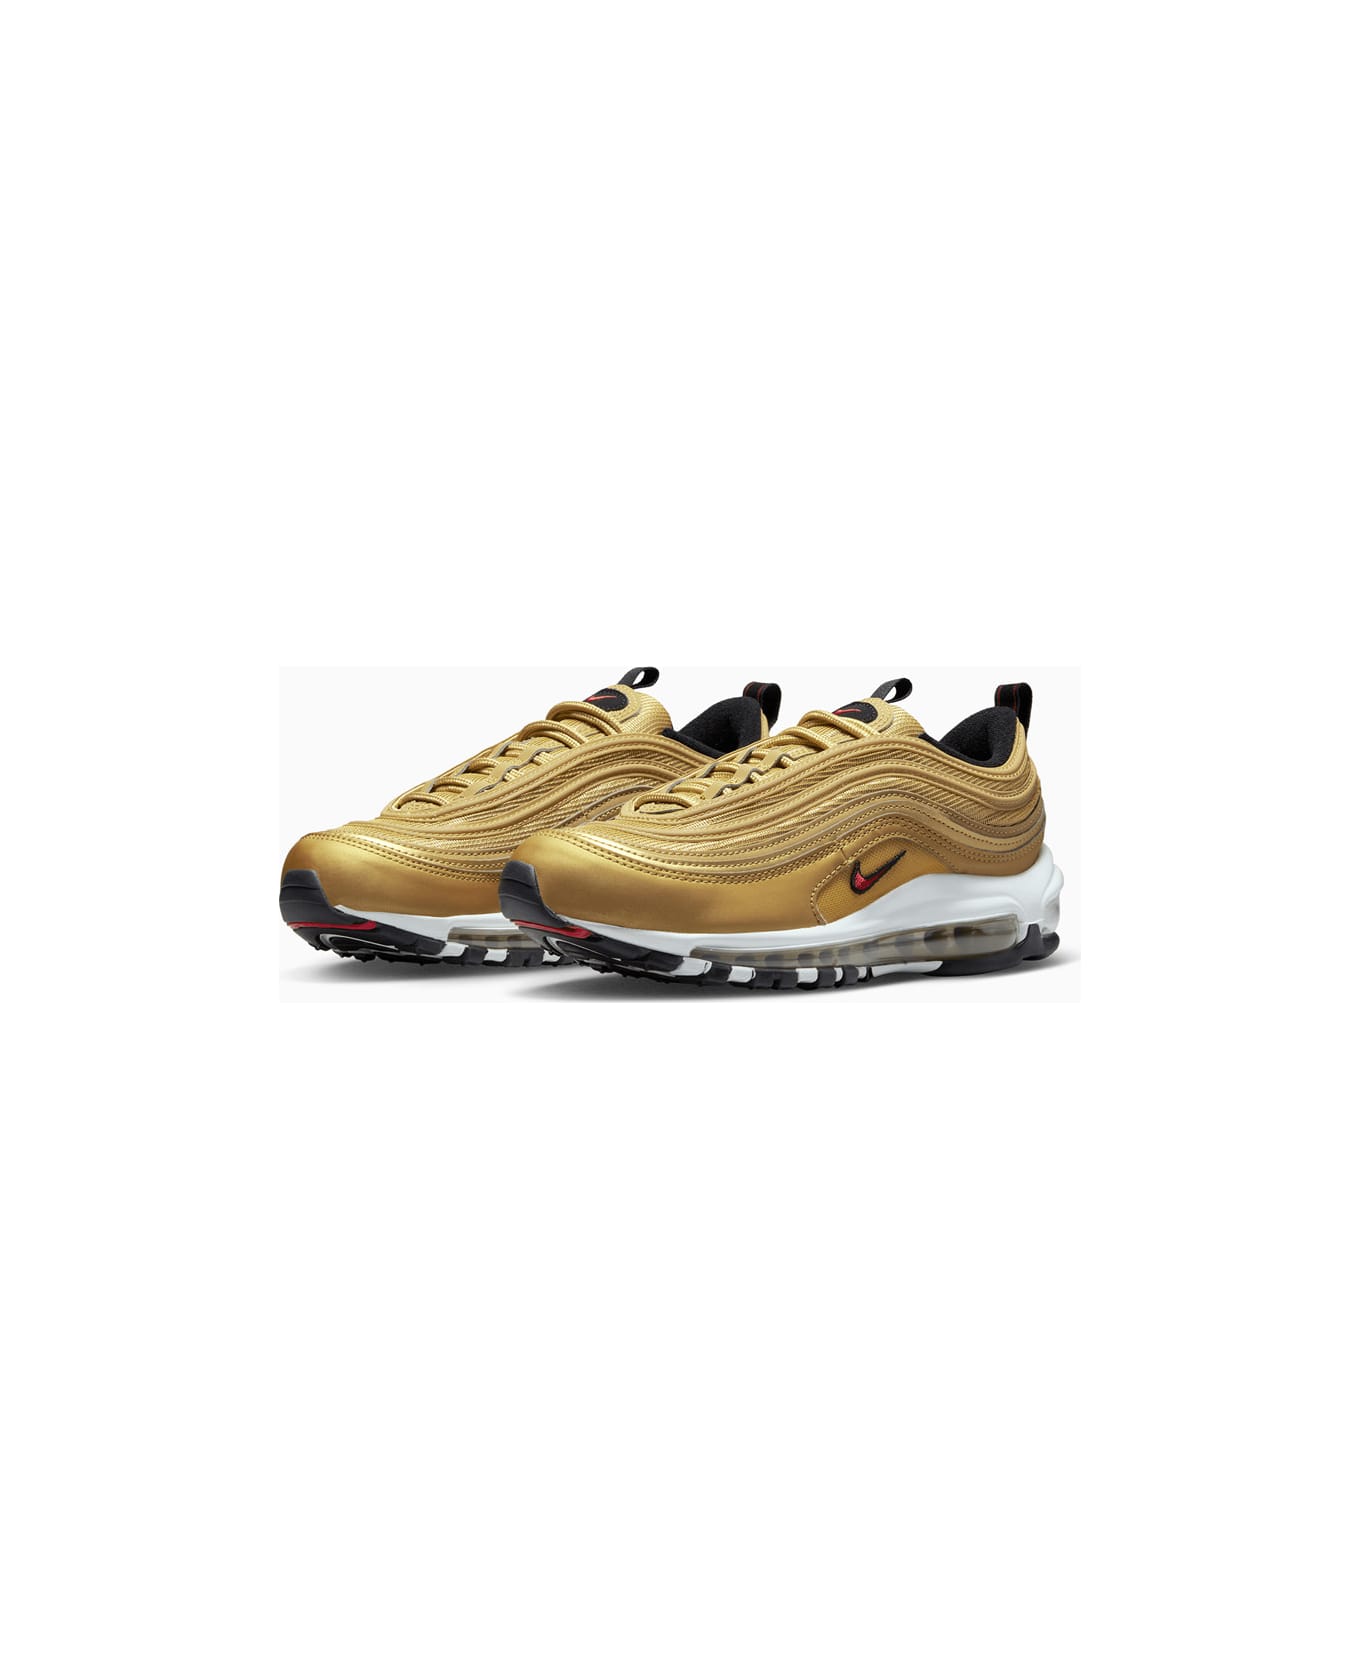 Nike Air Max 97 Og 'gold' Sneakers Dq9131-700 - Gold